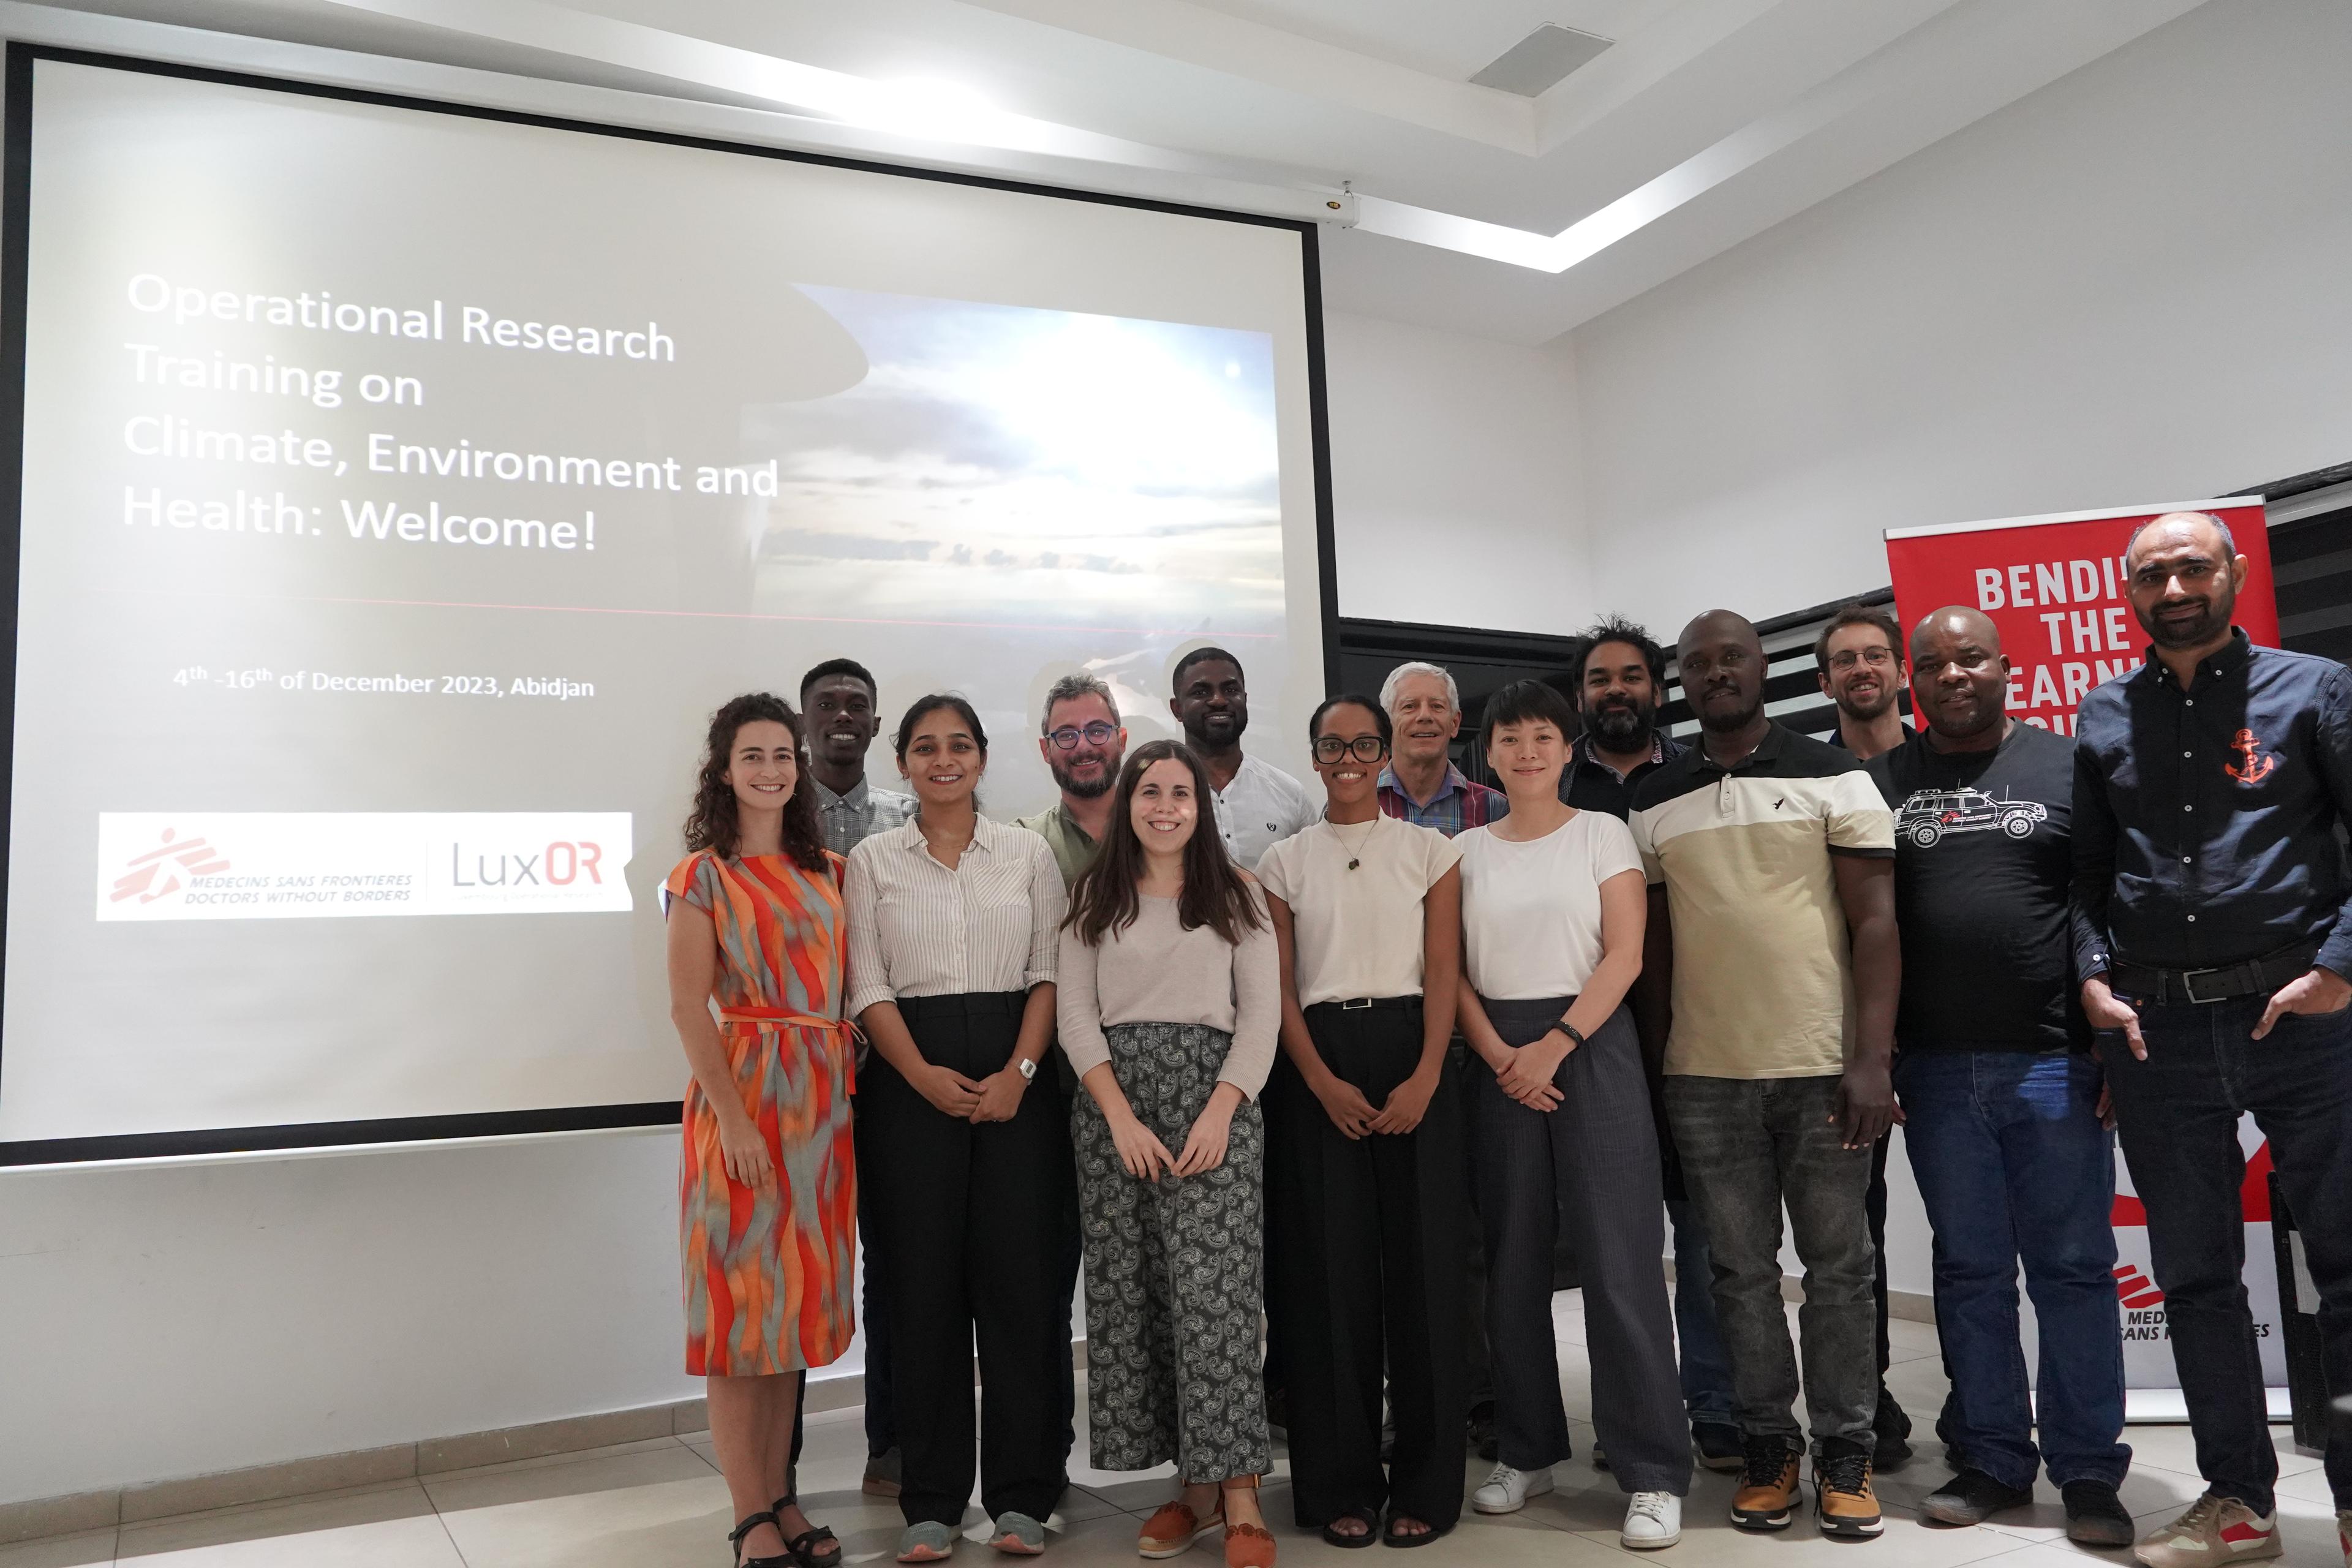 Participants in the 2023 MSF Operational Research Training on Climate, Environment and Health